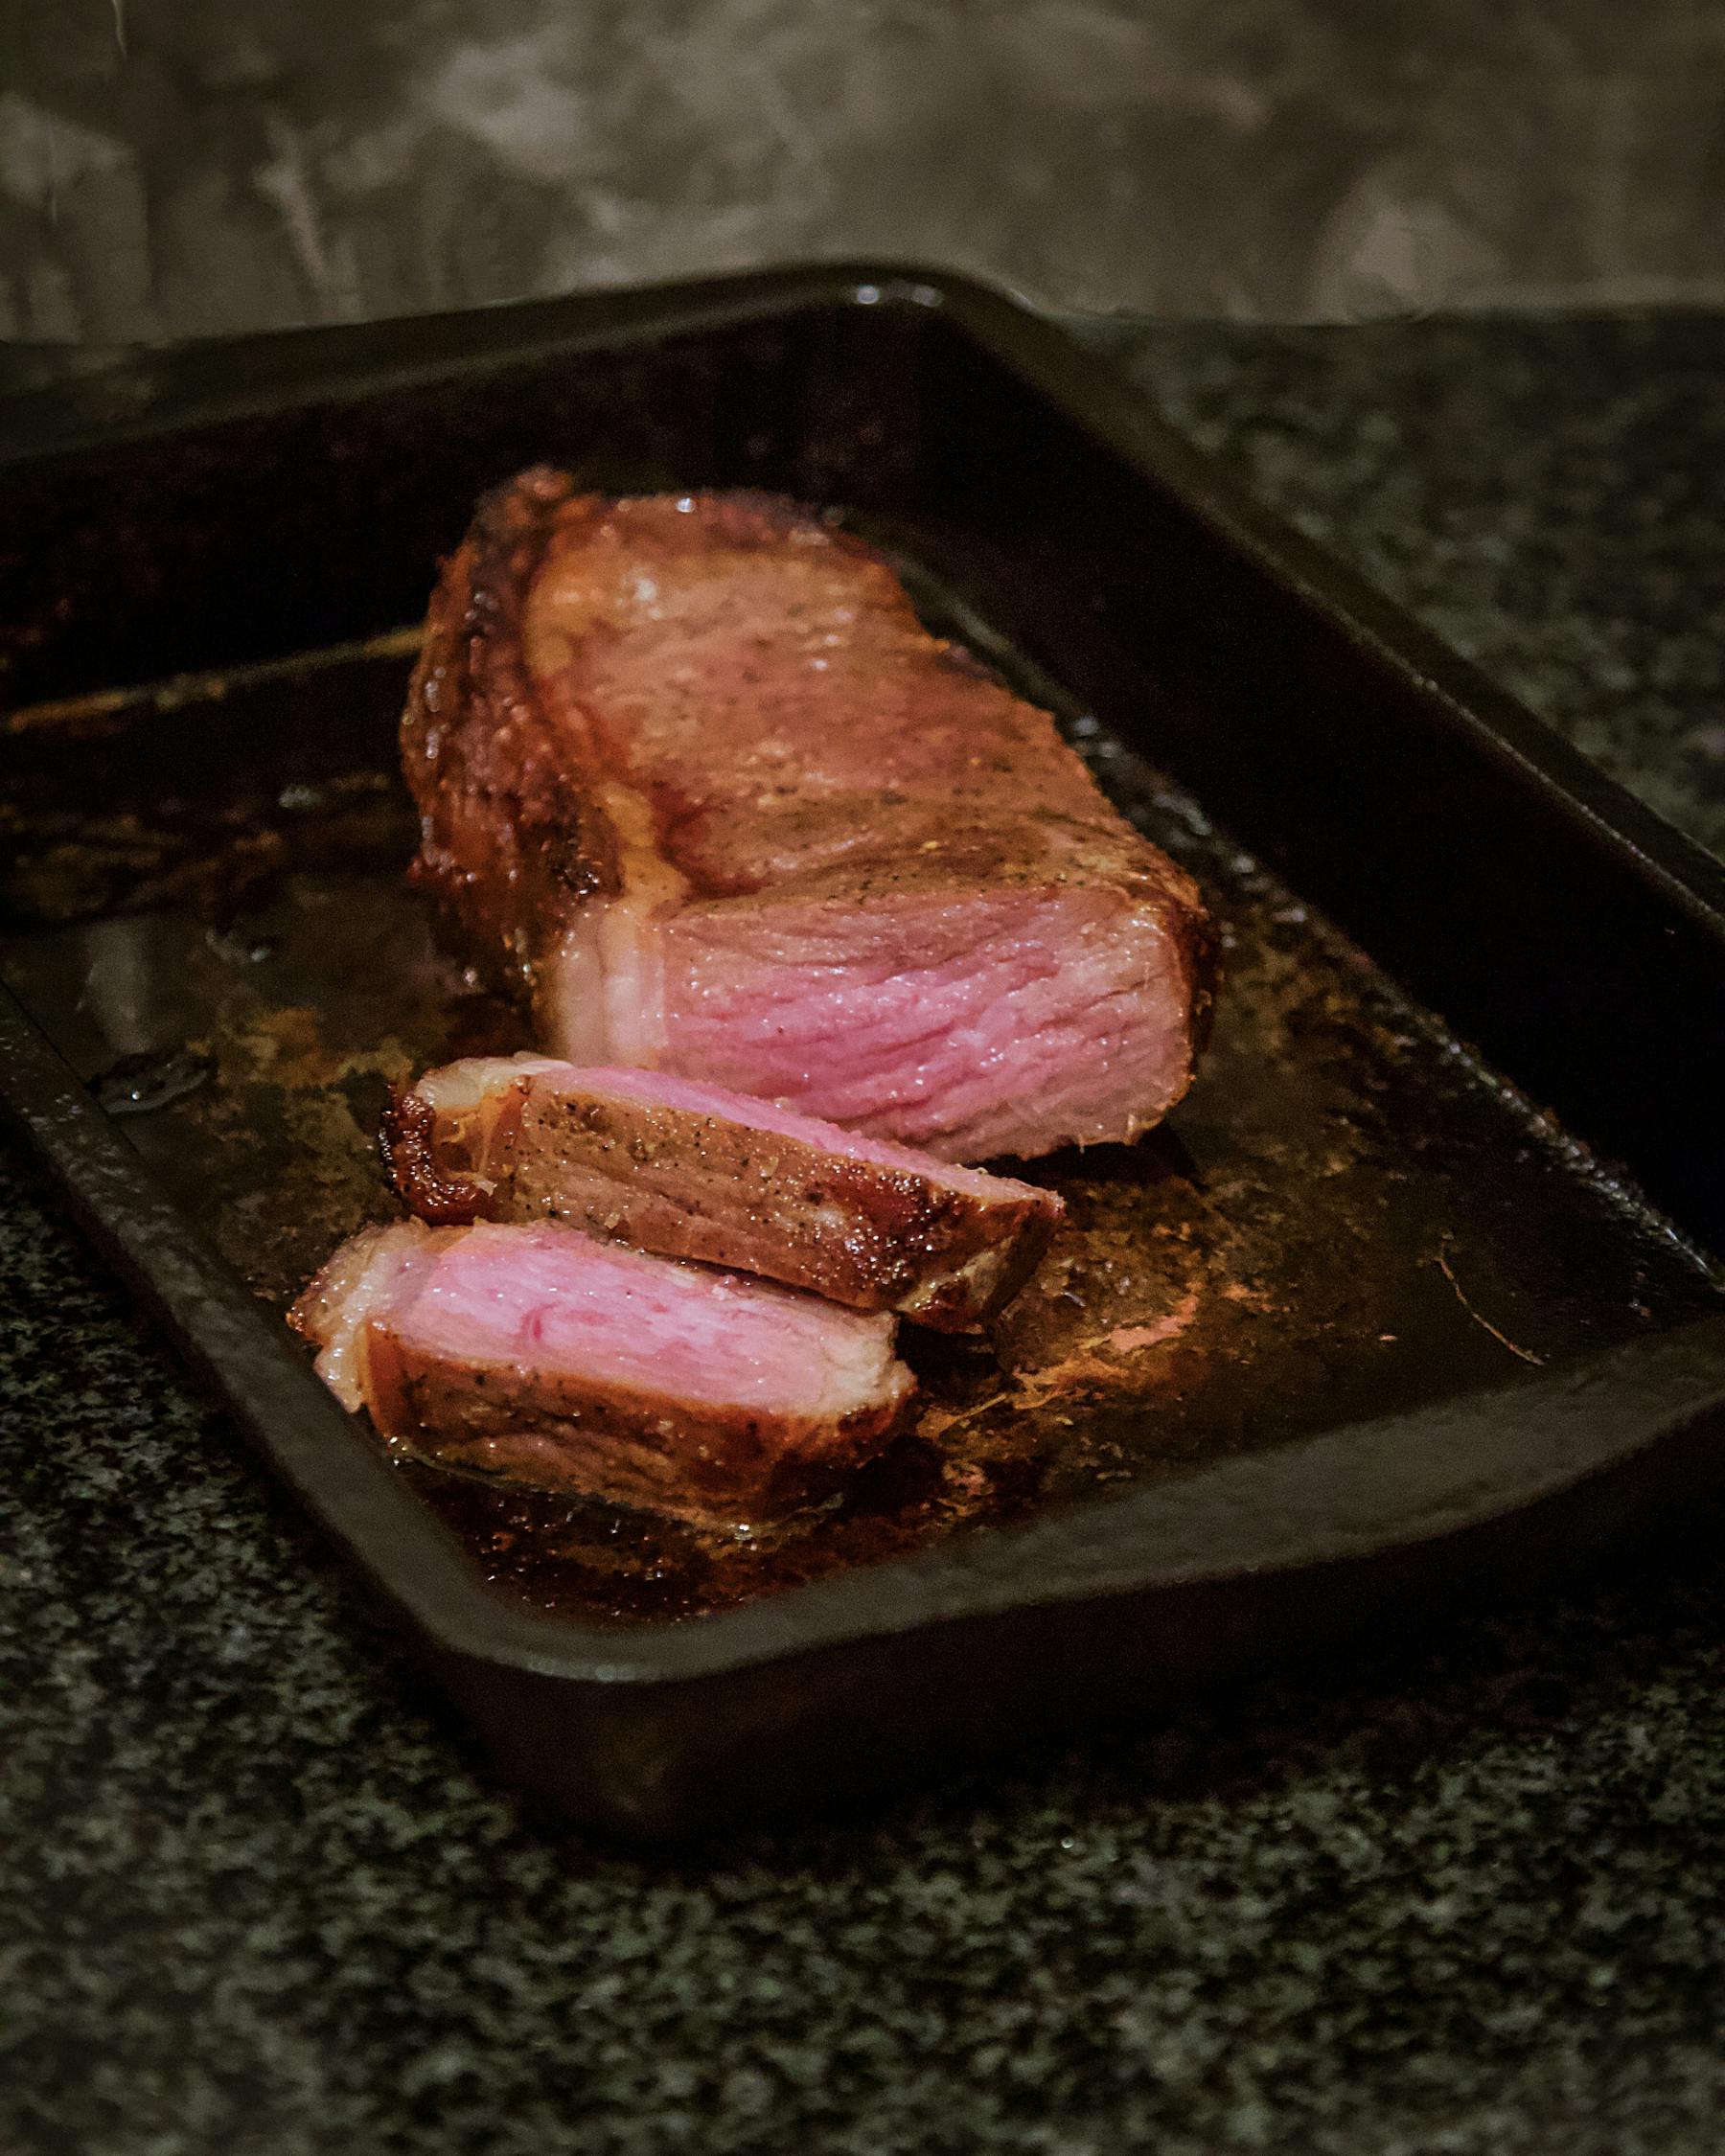 a close up of a piece of meat on a cutting board